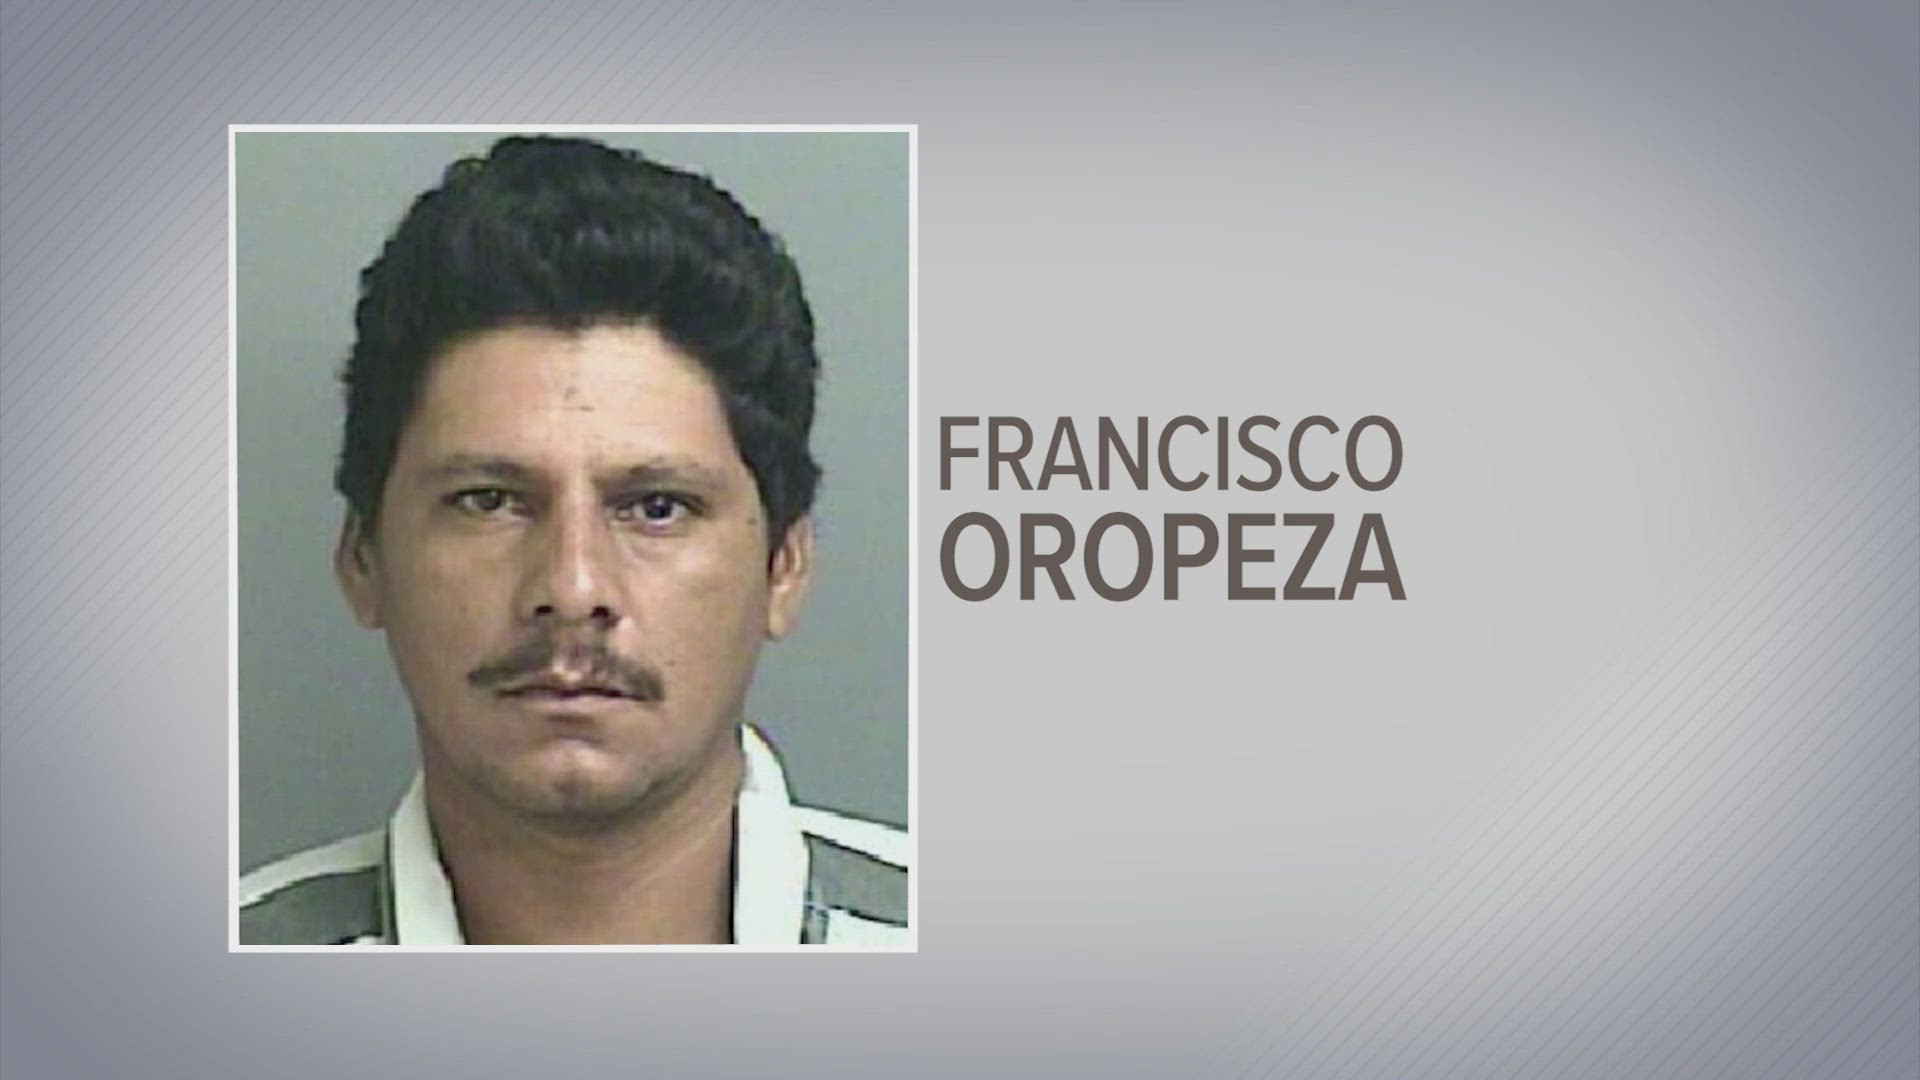 Francisco Oropeza is accused of killing five of his neighbors. It took law enforcement four days to find him after the shooting took place.